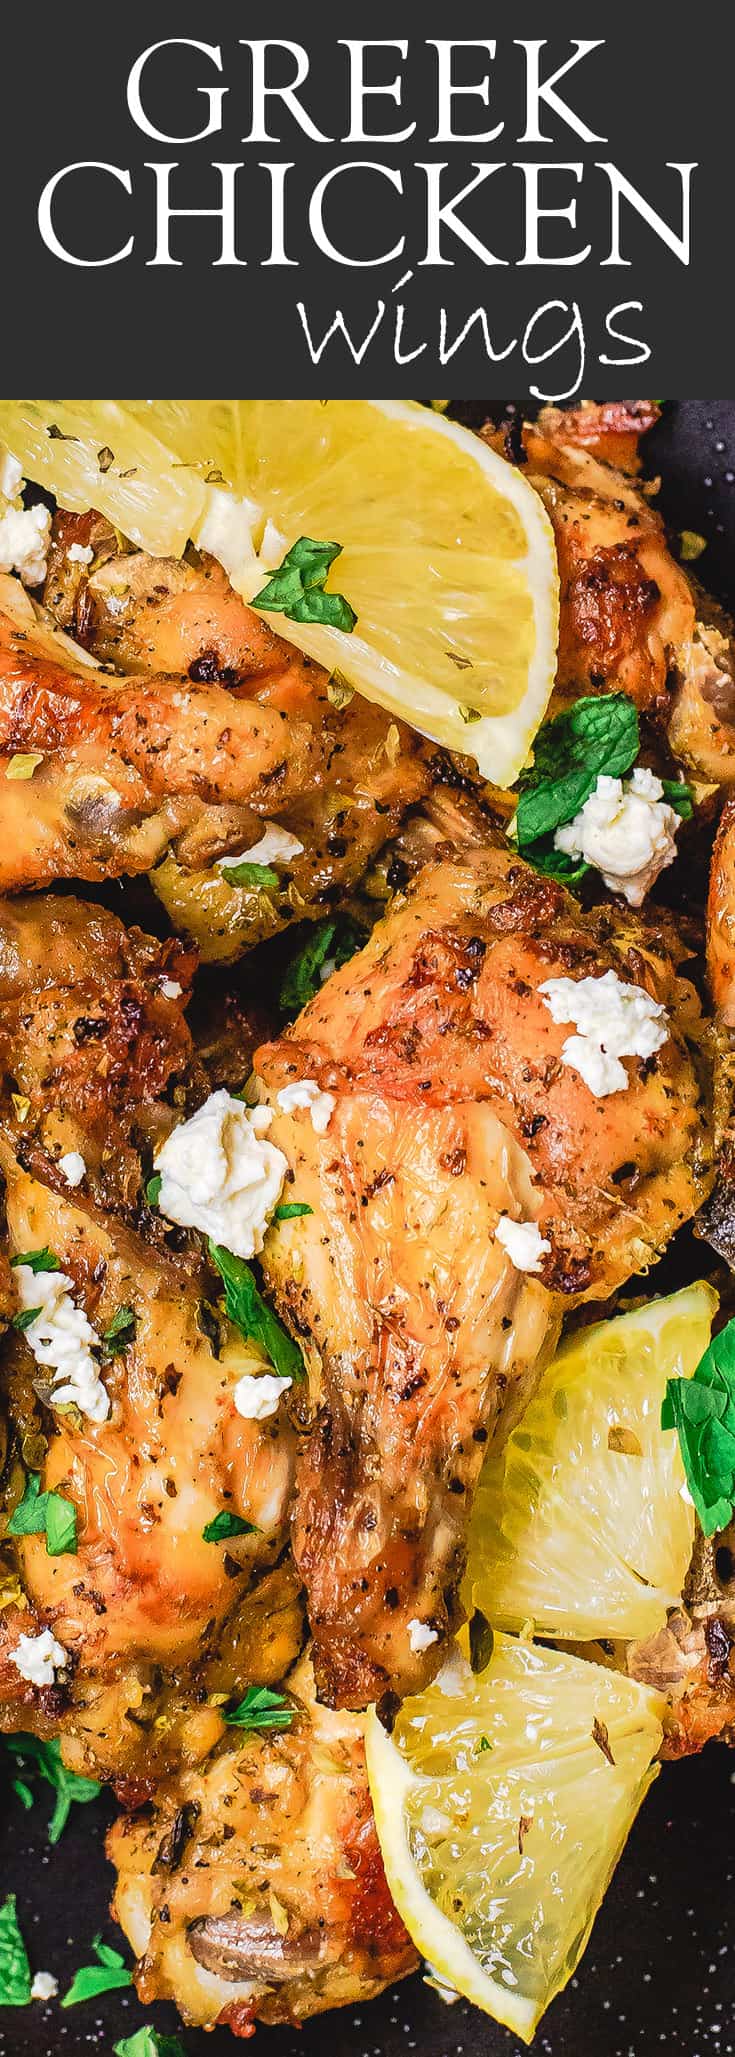 Greek Chicken Wings Recipe | The Mediterranean Dish. These chicken wings are the BEST! Easy, flavor-packed baked chicken wings that have been marinated Greek-style with olive oil, lemon juice, garlic and more! Get the recipe on TheMediterraneanDish.com